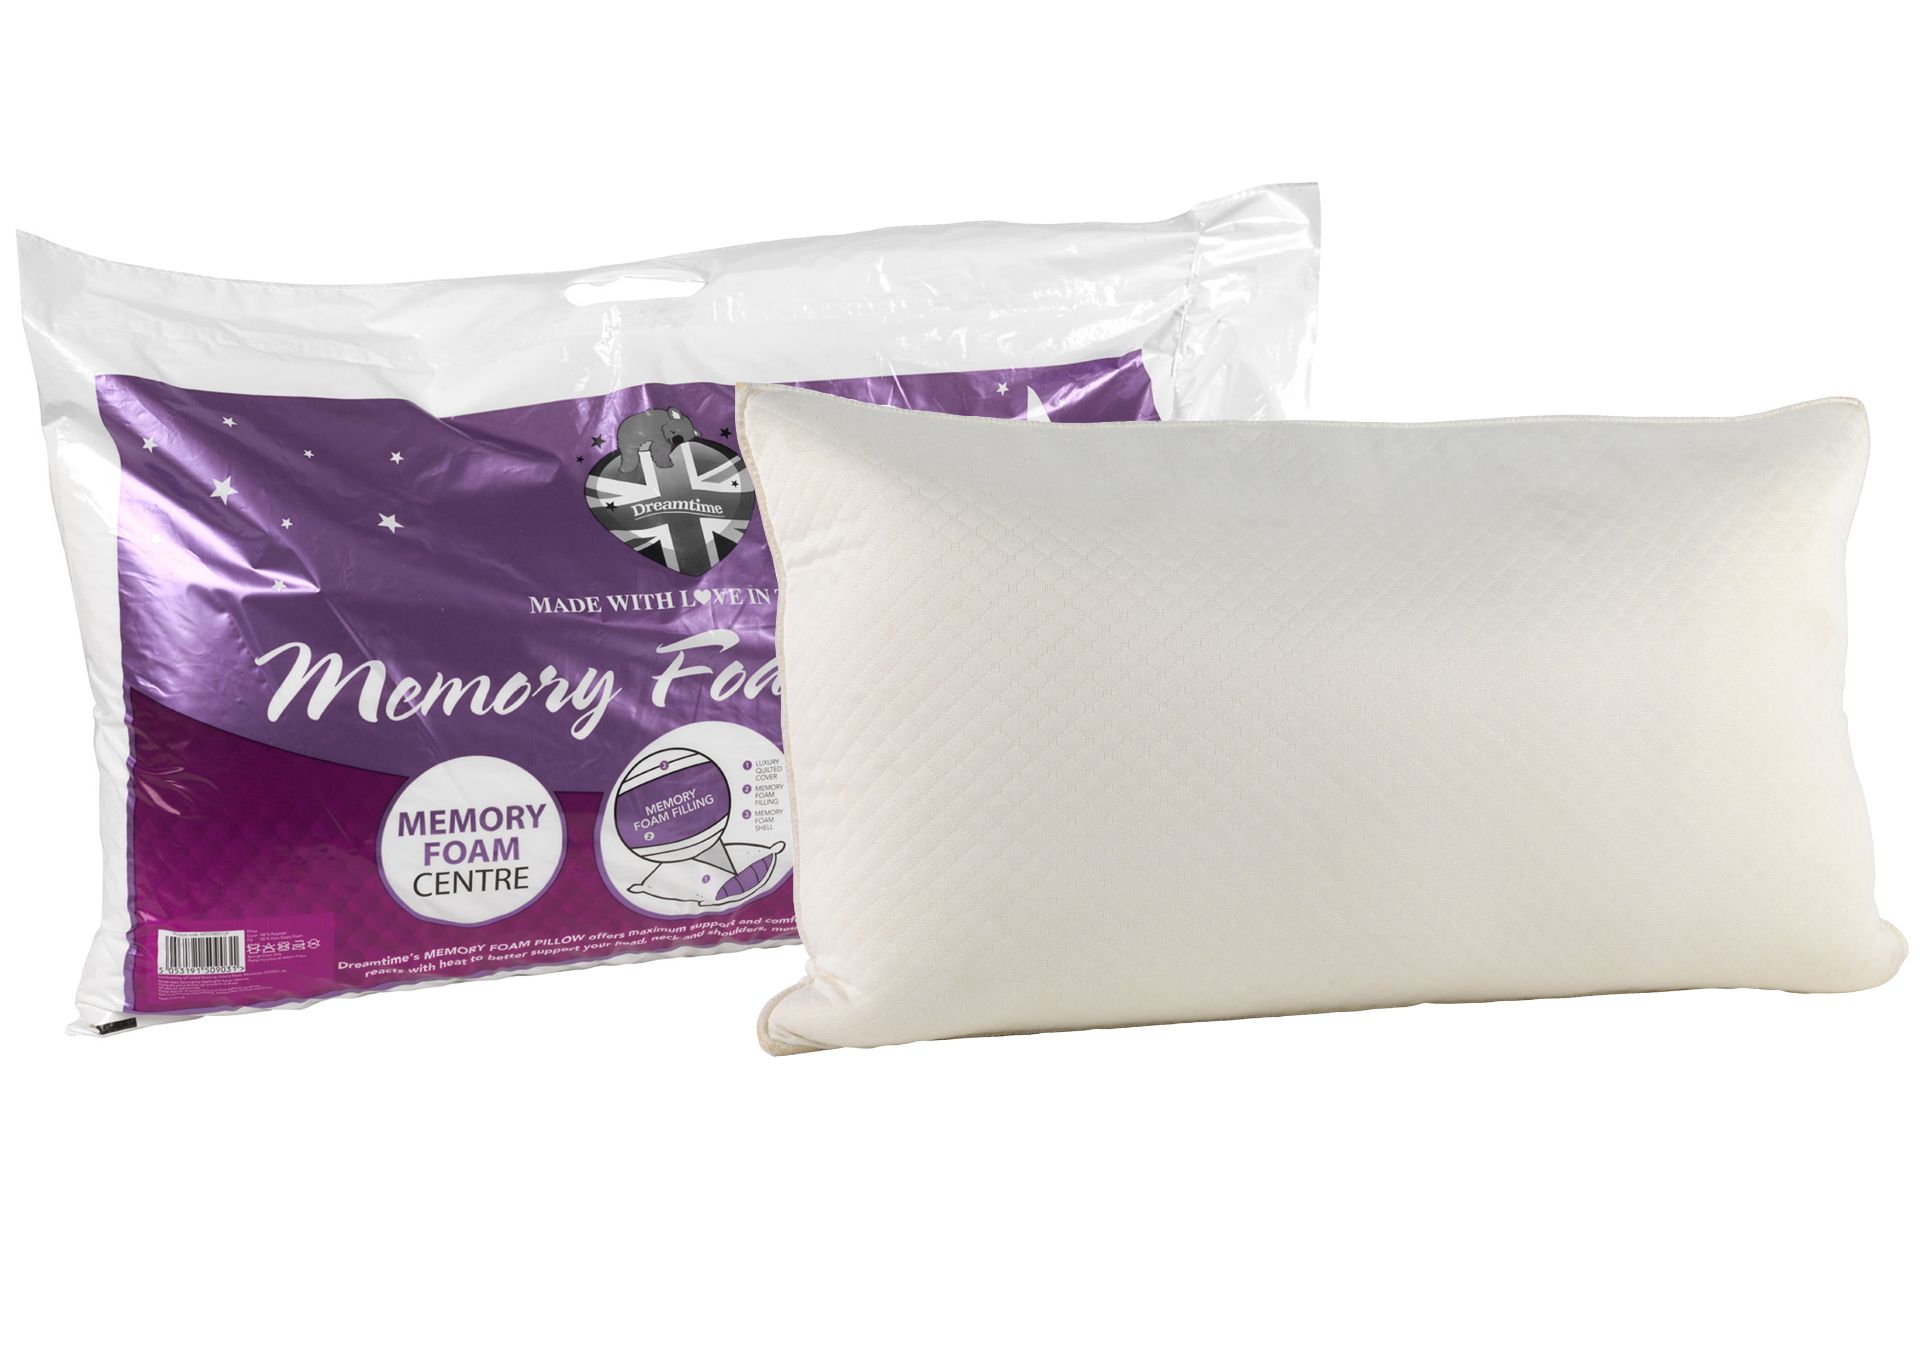 V *TRADE QTY* Brand New Memory Foam Pillow With Luxury Quilted Cover RRP£14.99 X 65 YOUR BID PRICE